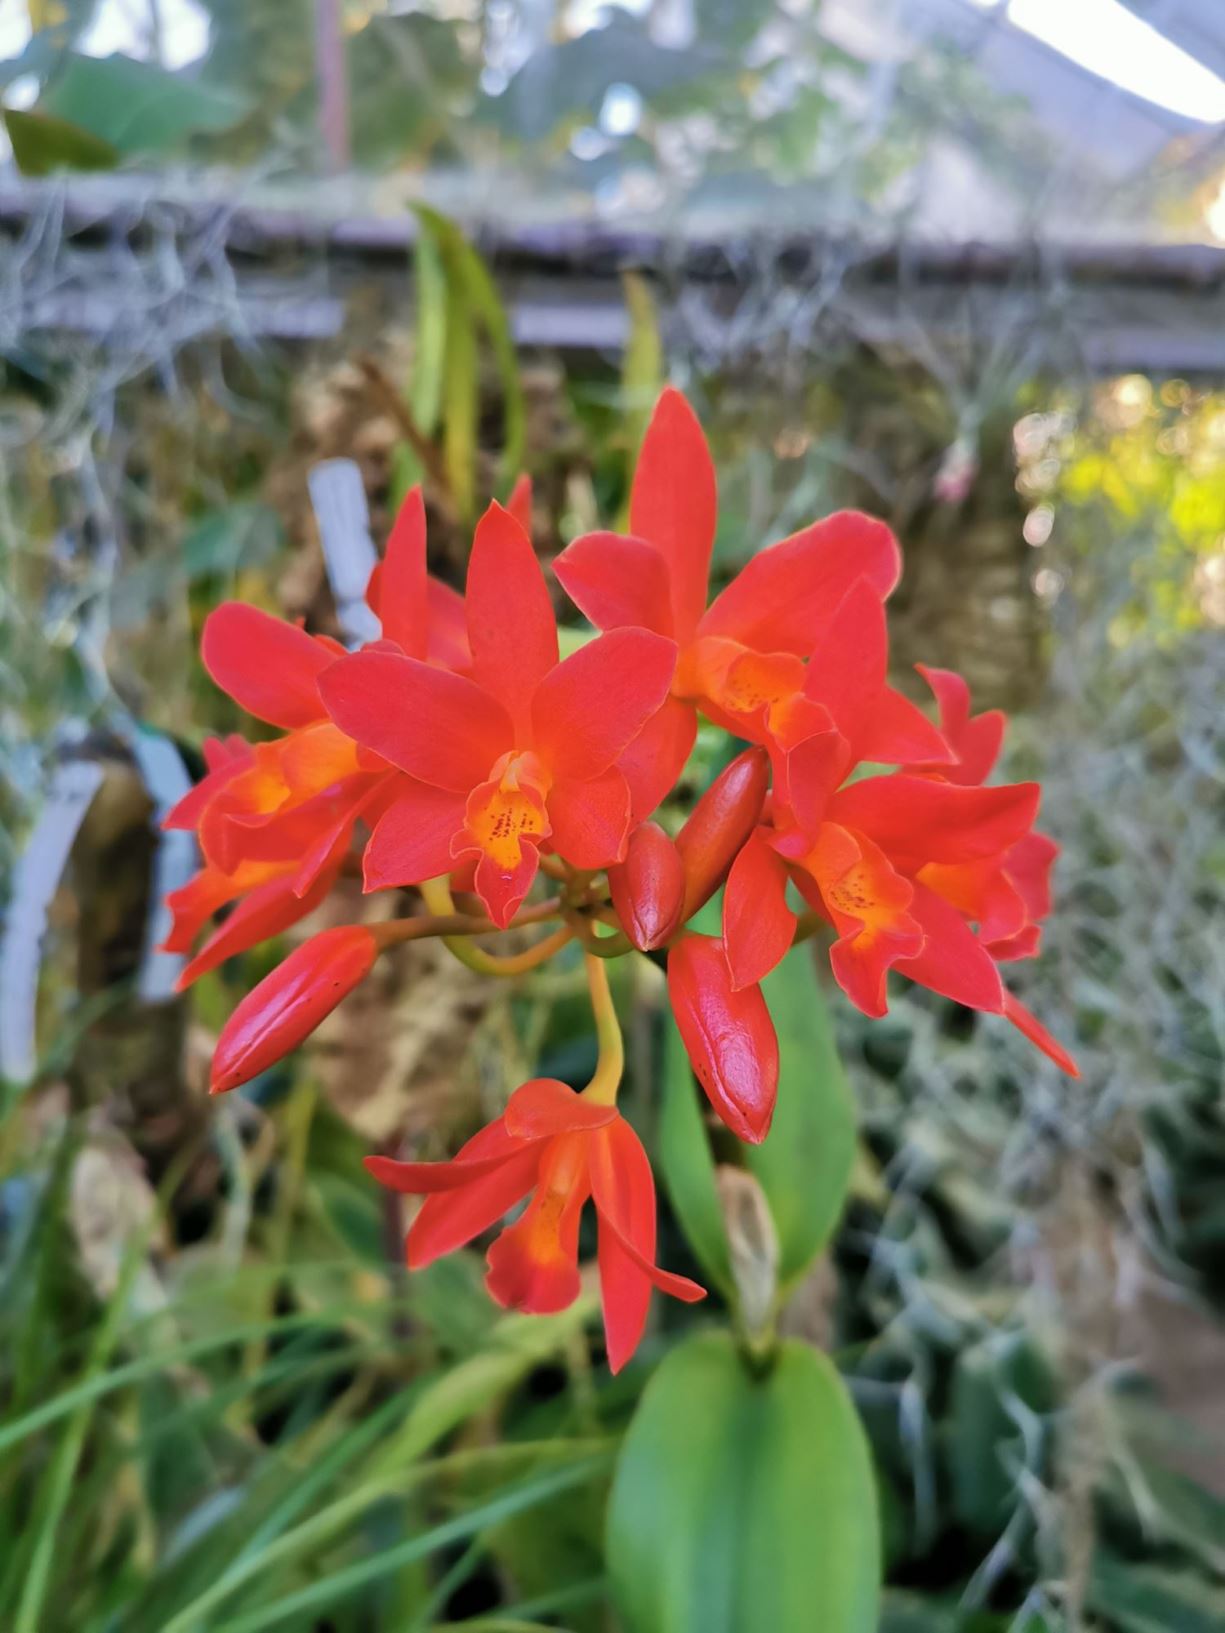 Laeliocattleya (Lc. Trick or Treat × [Lc. Scarlet Imp × S coccinia × Lc. Chit Chat]) - laeliocattleya